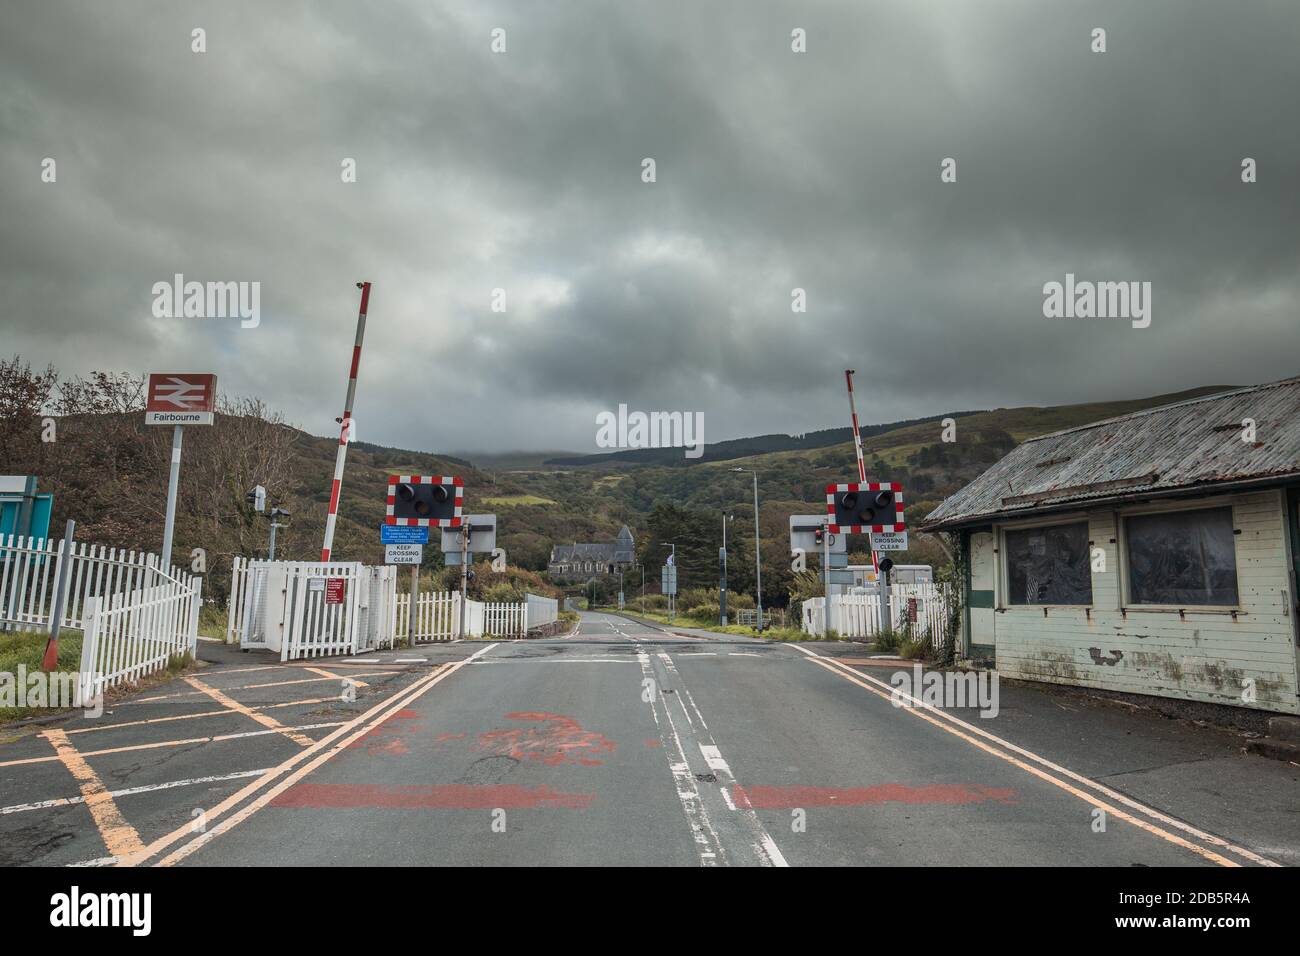 Empty railroad crossing at cloudy day in Fairbourne, North Wales, United Kingdom Stock Photo